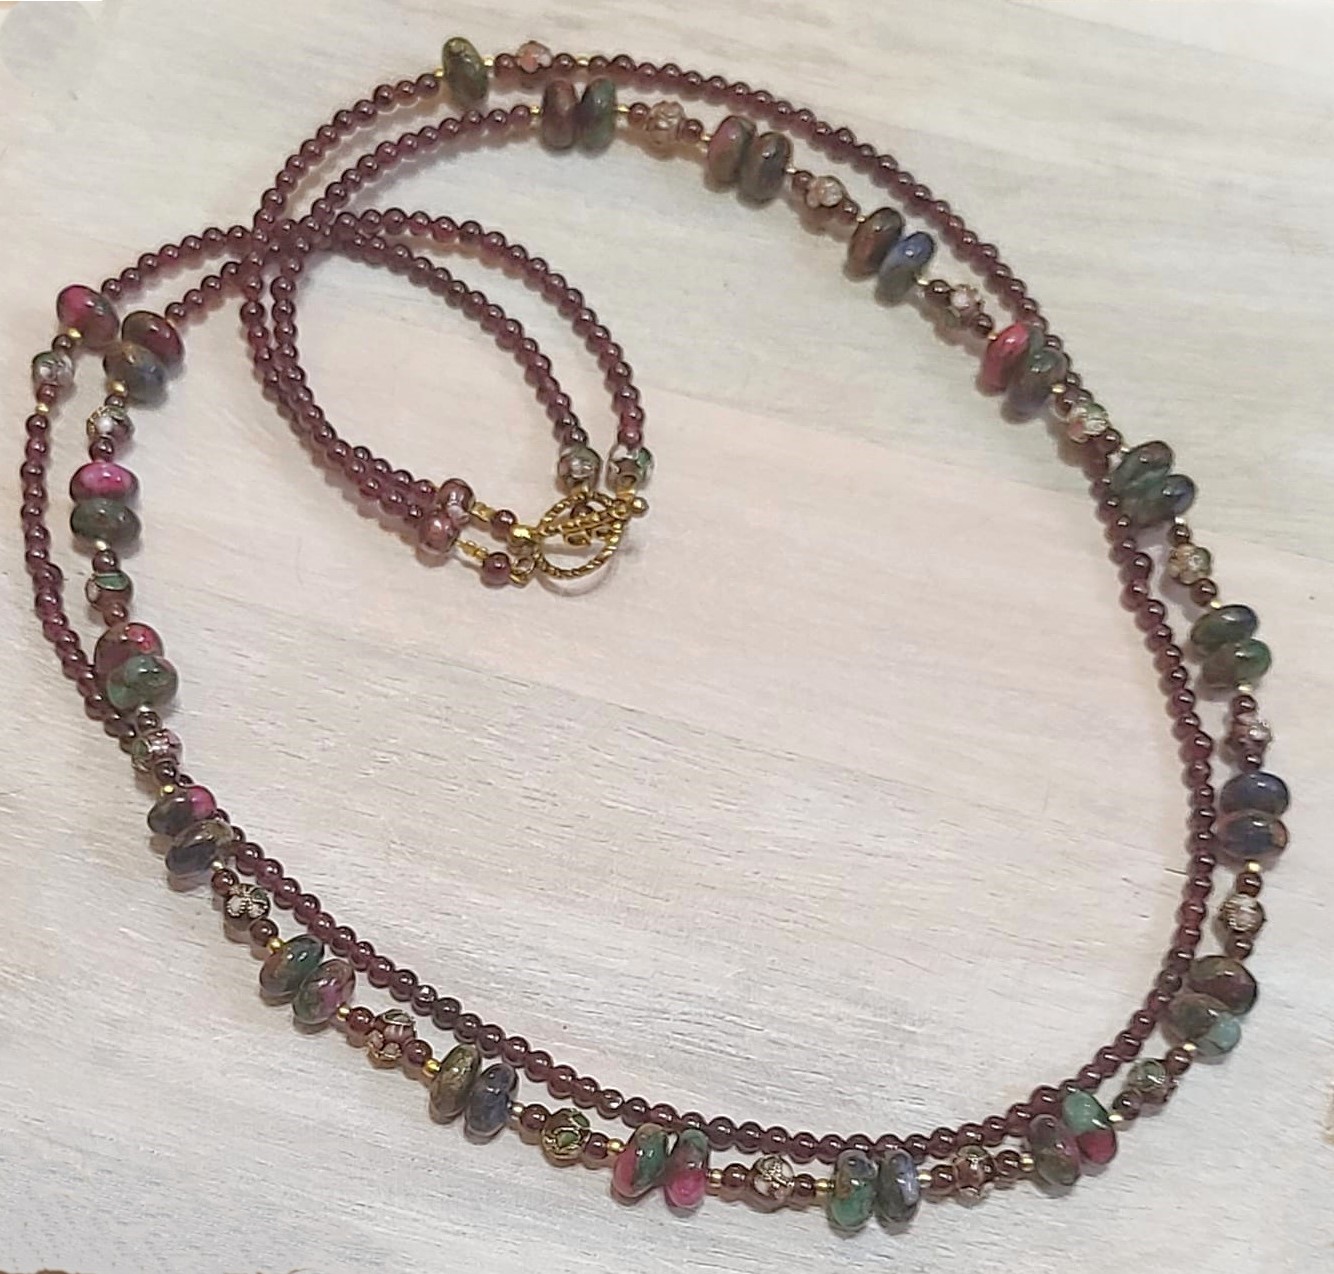 Gemstone necklace, 2 strand with pressed ruby, emerald, sapphire